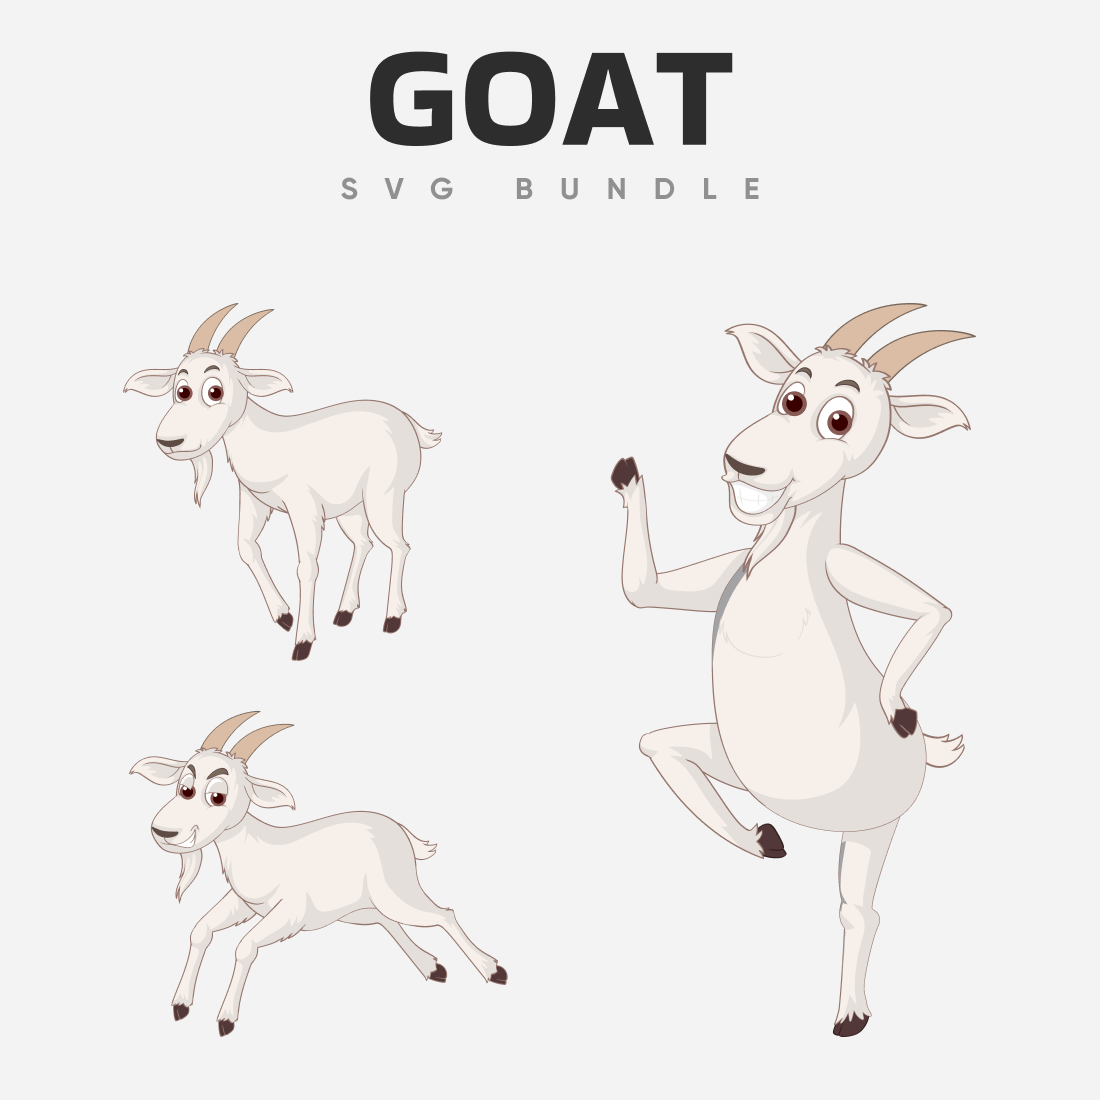 Goat is running and jumping in different poses.